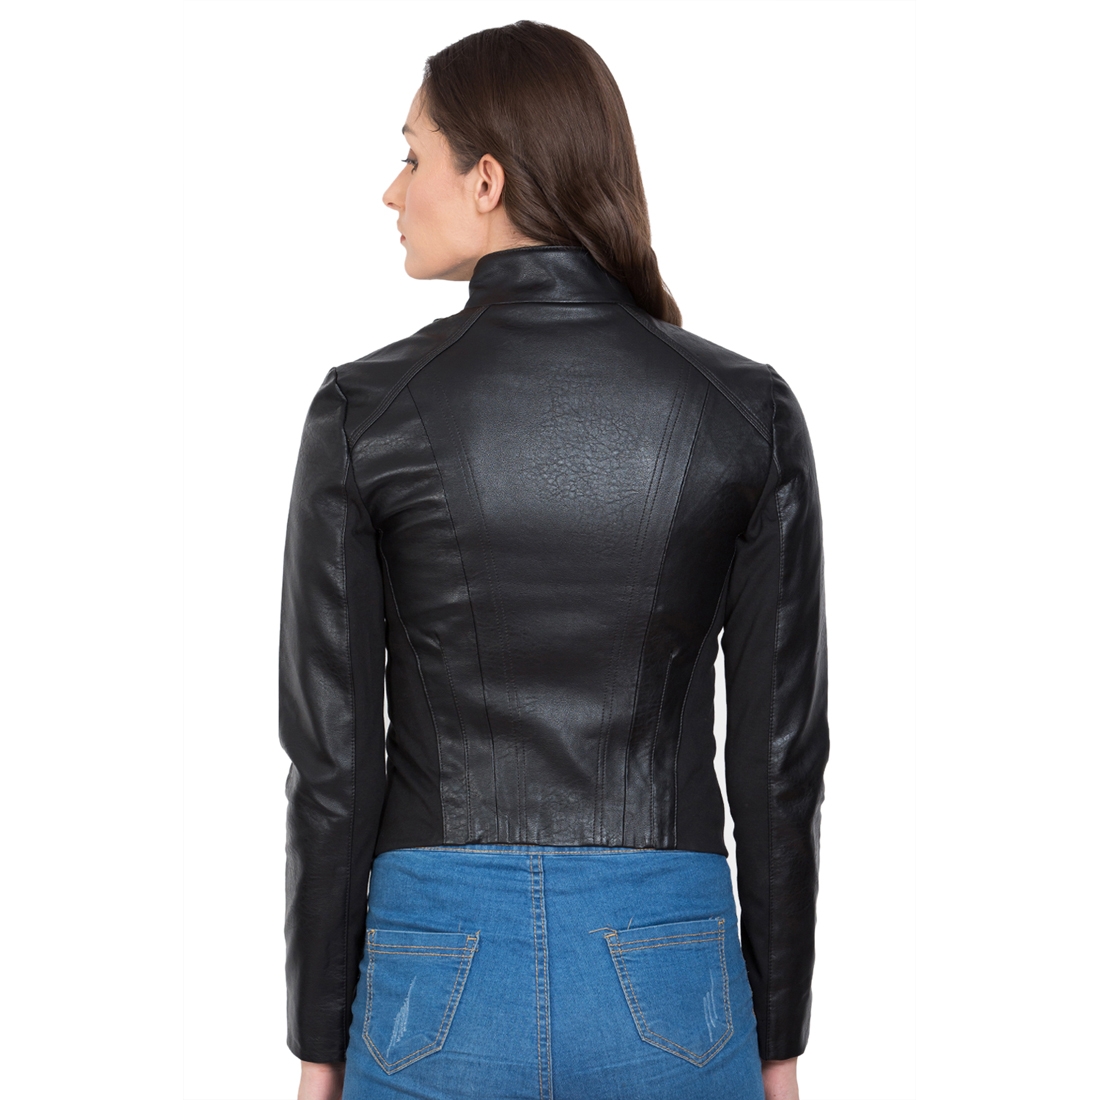 Justanned | JUSTANNED CARBON WOMEN LEATHER JACKET 4